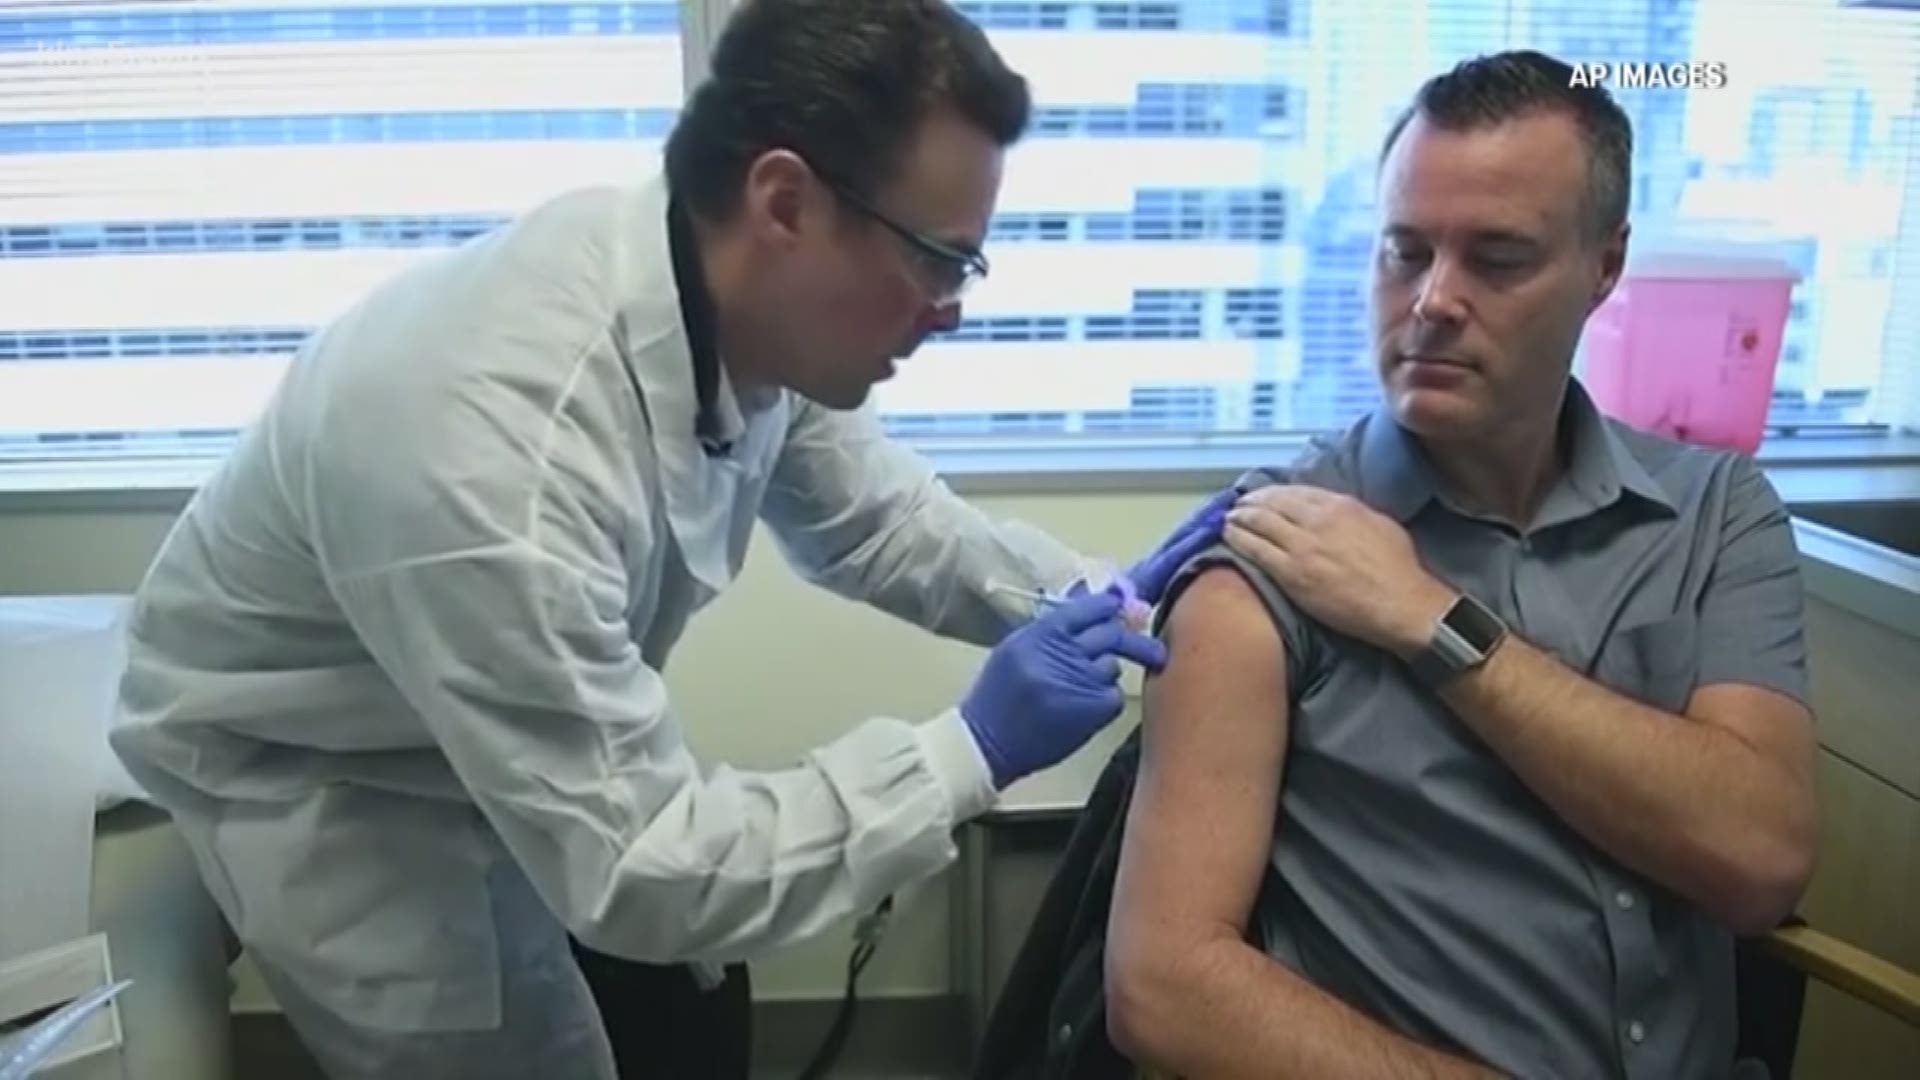 Kaiser-Permanente has begun trials on a coronavirus vaccine. The injections given do not actually contain coronavirus, so there is no chance of infection.